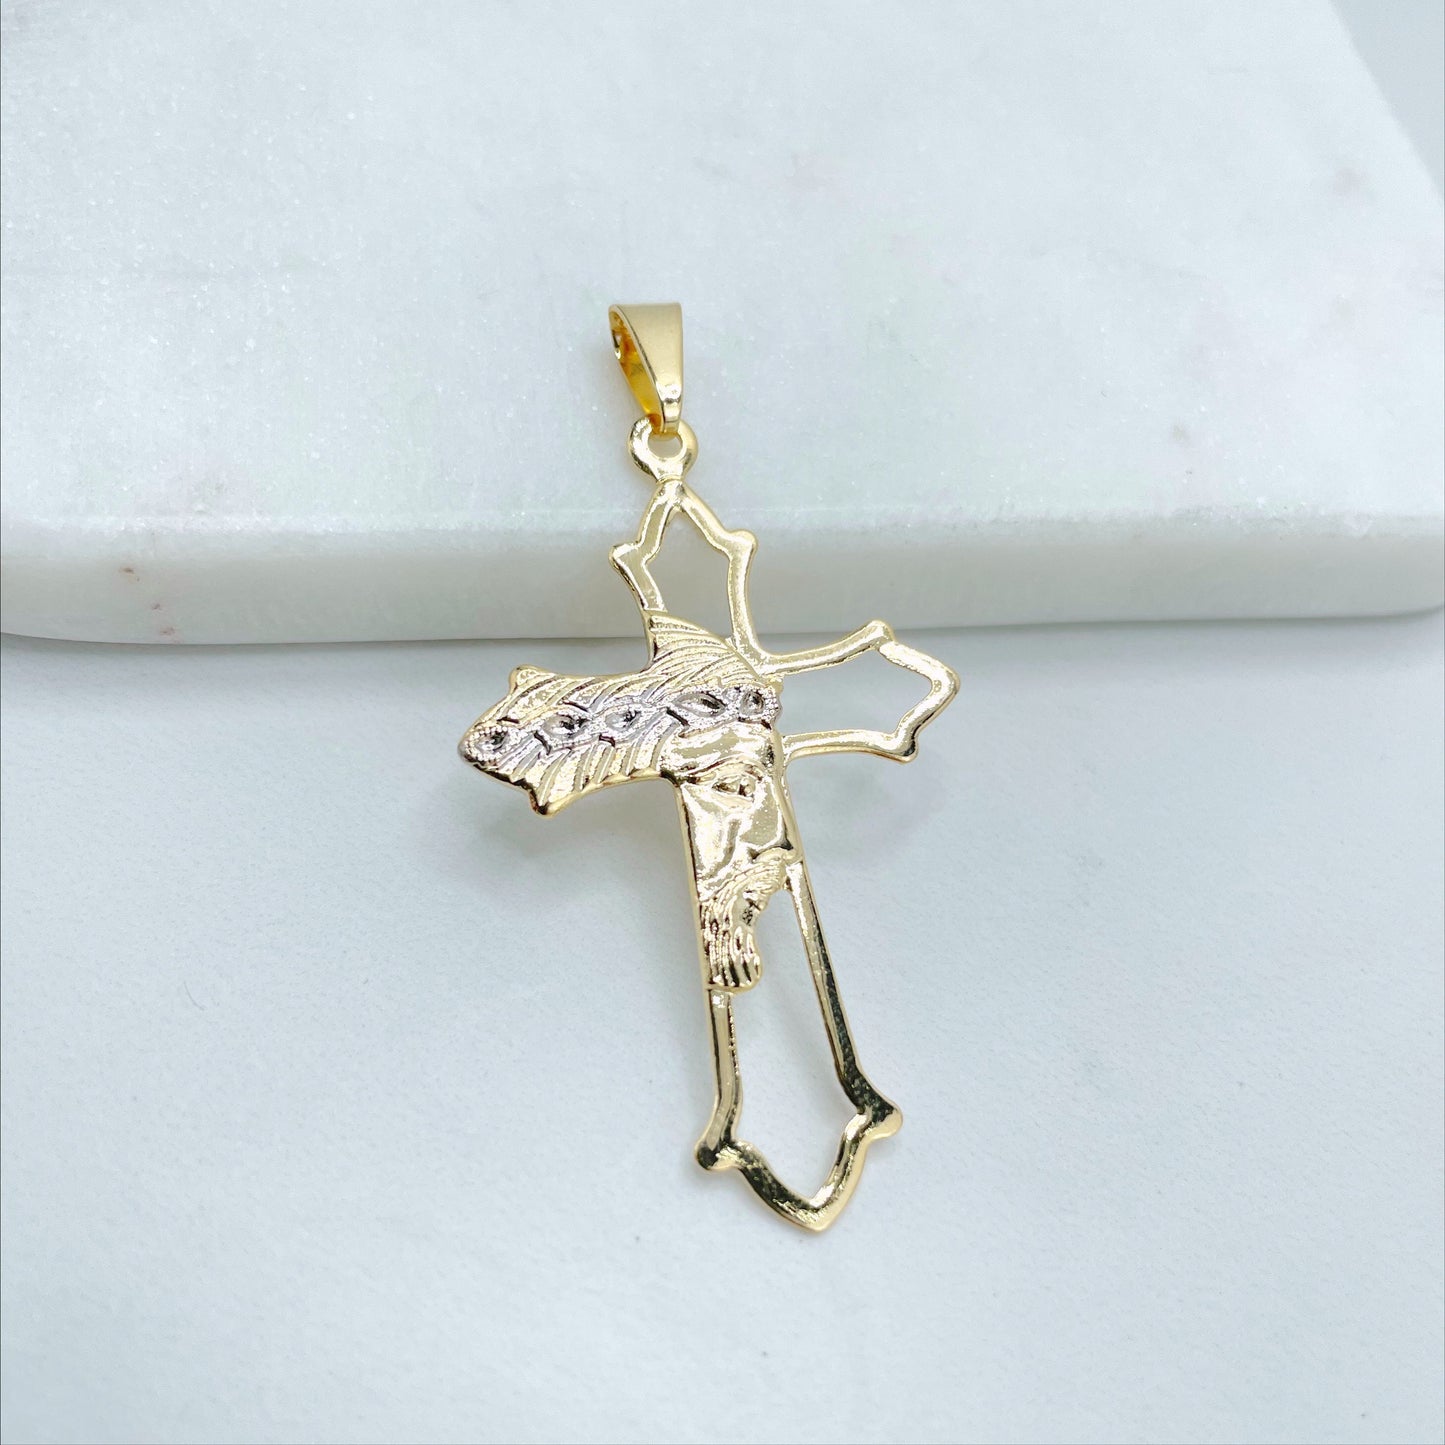 18k Gold Filled Two Tone Cross with Jesus Face Charms Pendants, Catholic Religious Holy Cross, Wholesale Jewelry Making Supplies